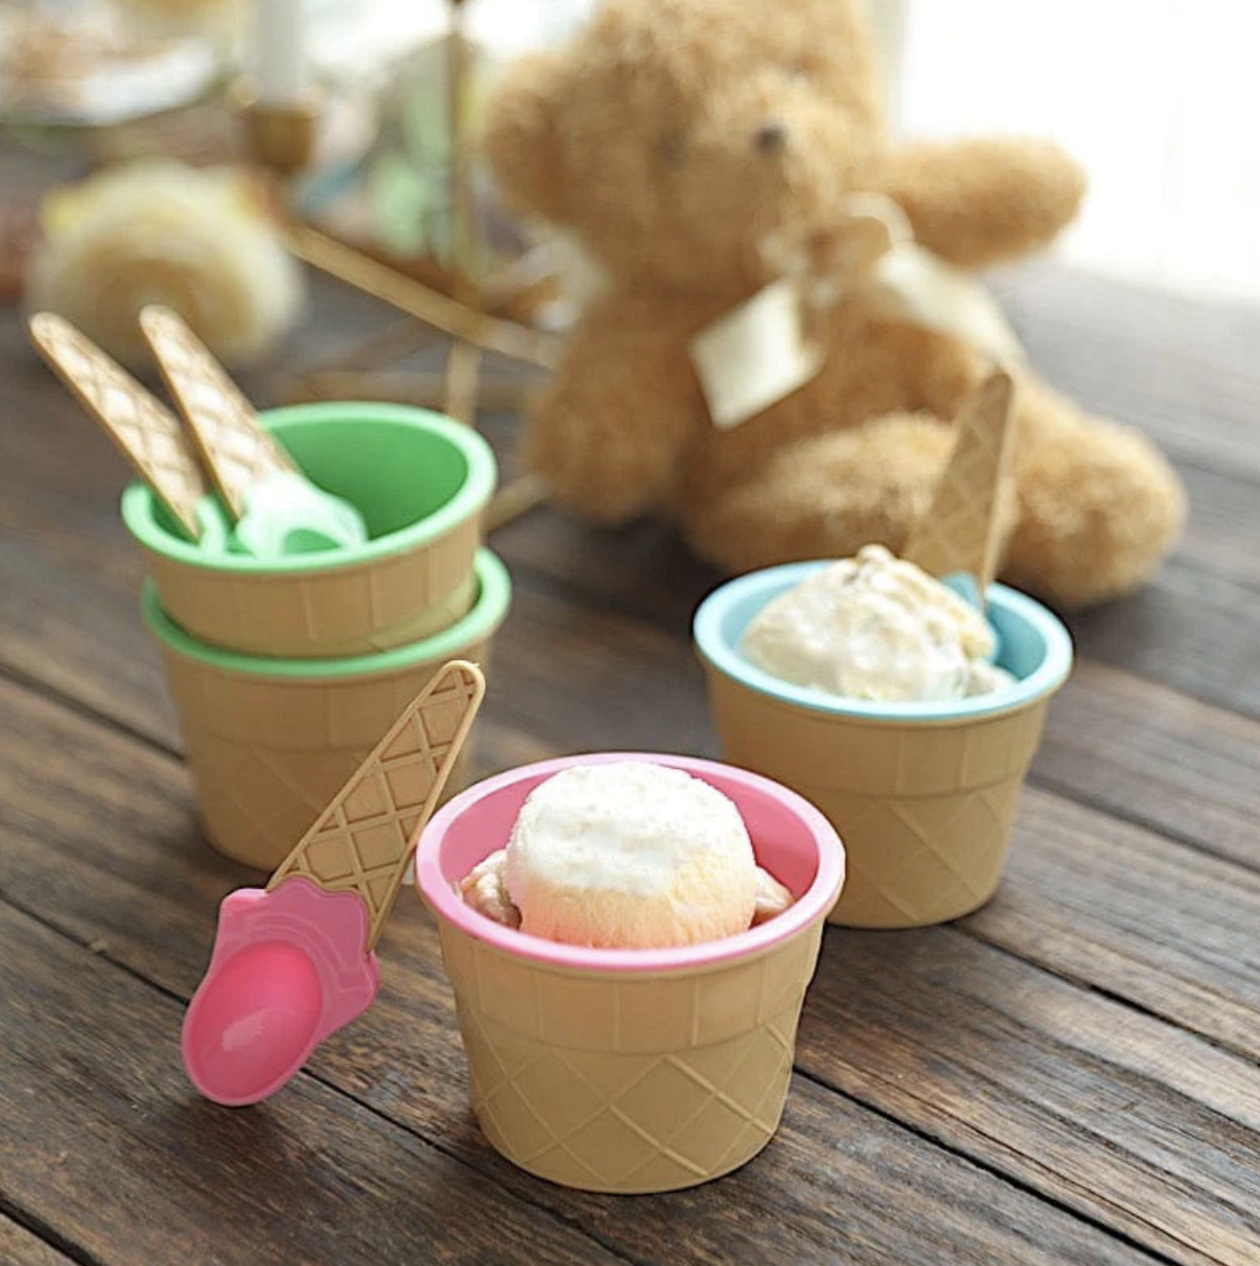 6 Reusable Plastic Dessert Cups Ice Cream Bowls with Spoons Set - Assorted